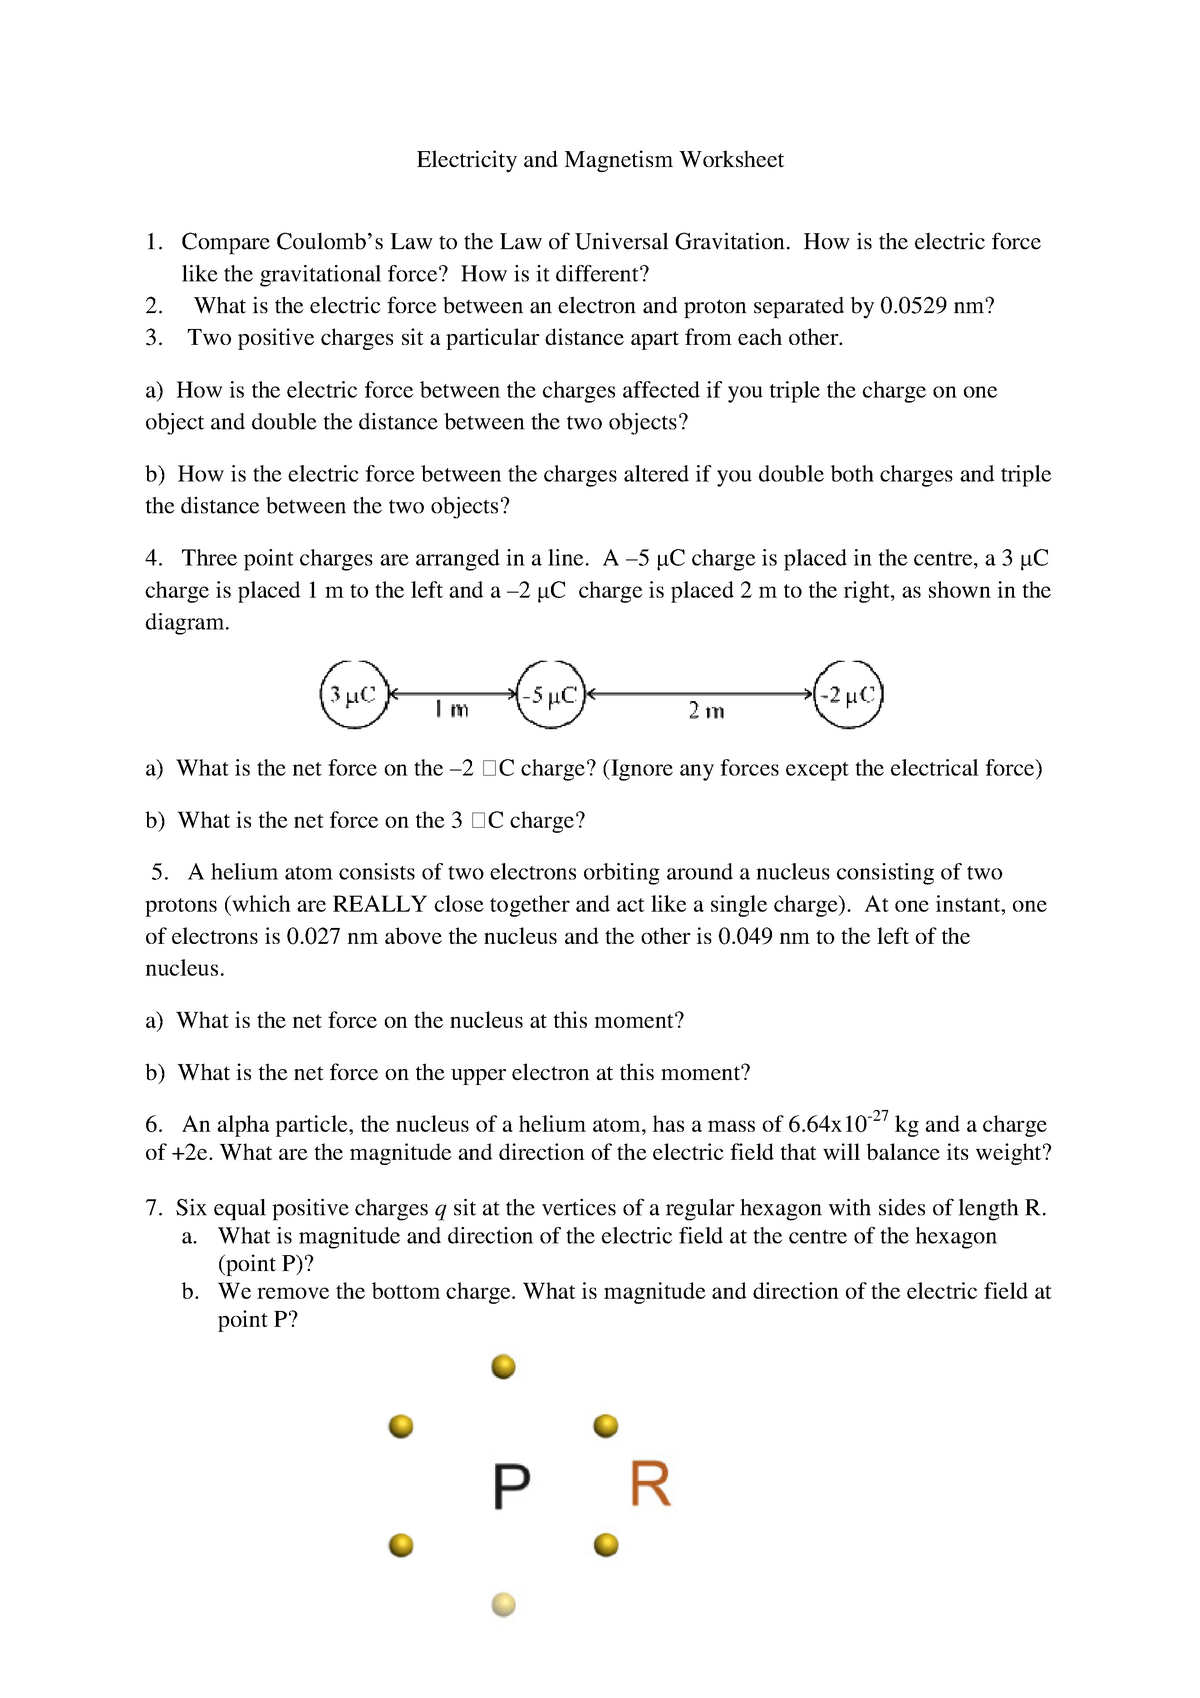 electricity-and-magnetism-worksheet-compare-coulomb-s-law-to-the-law